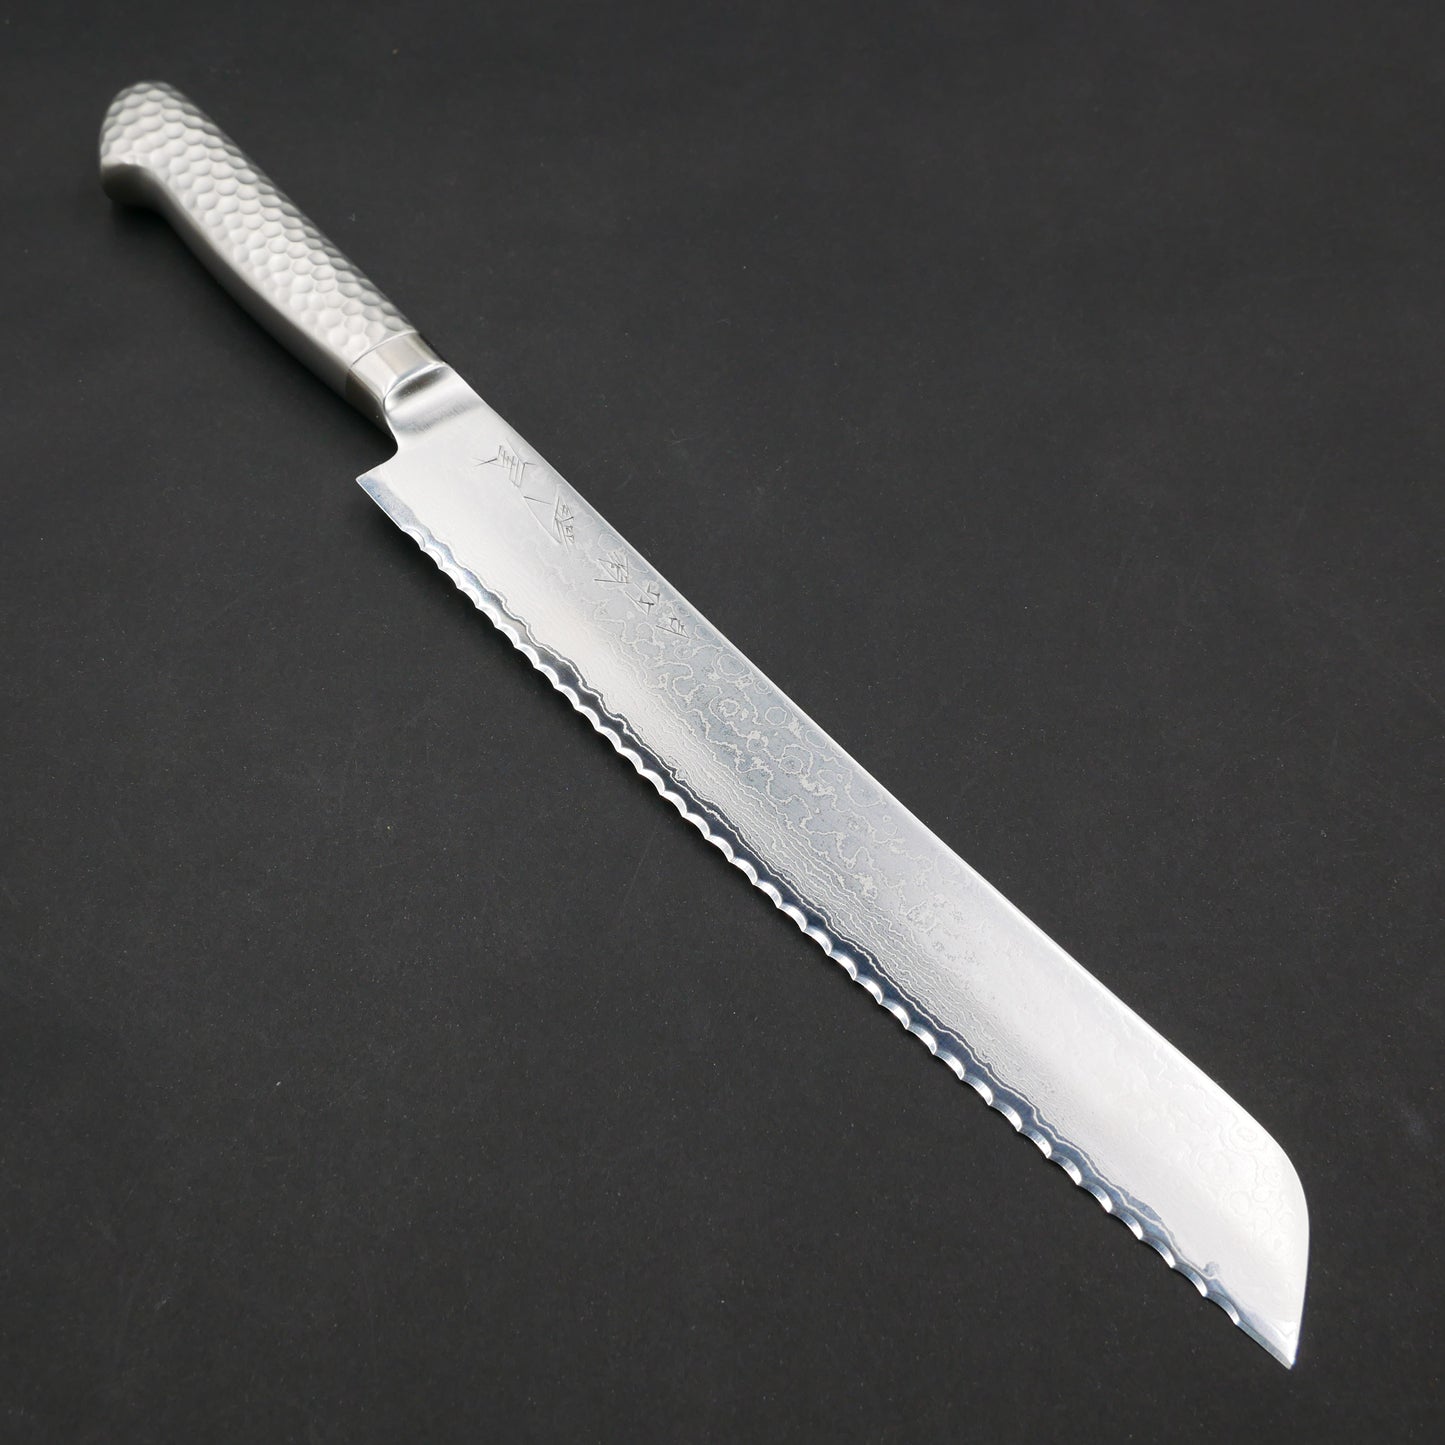 Molybdenum Steel 63 Layers Bread Knife Stainless Steel Handle